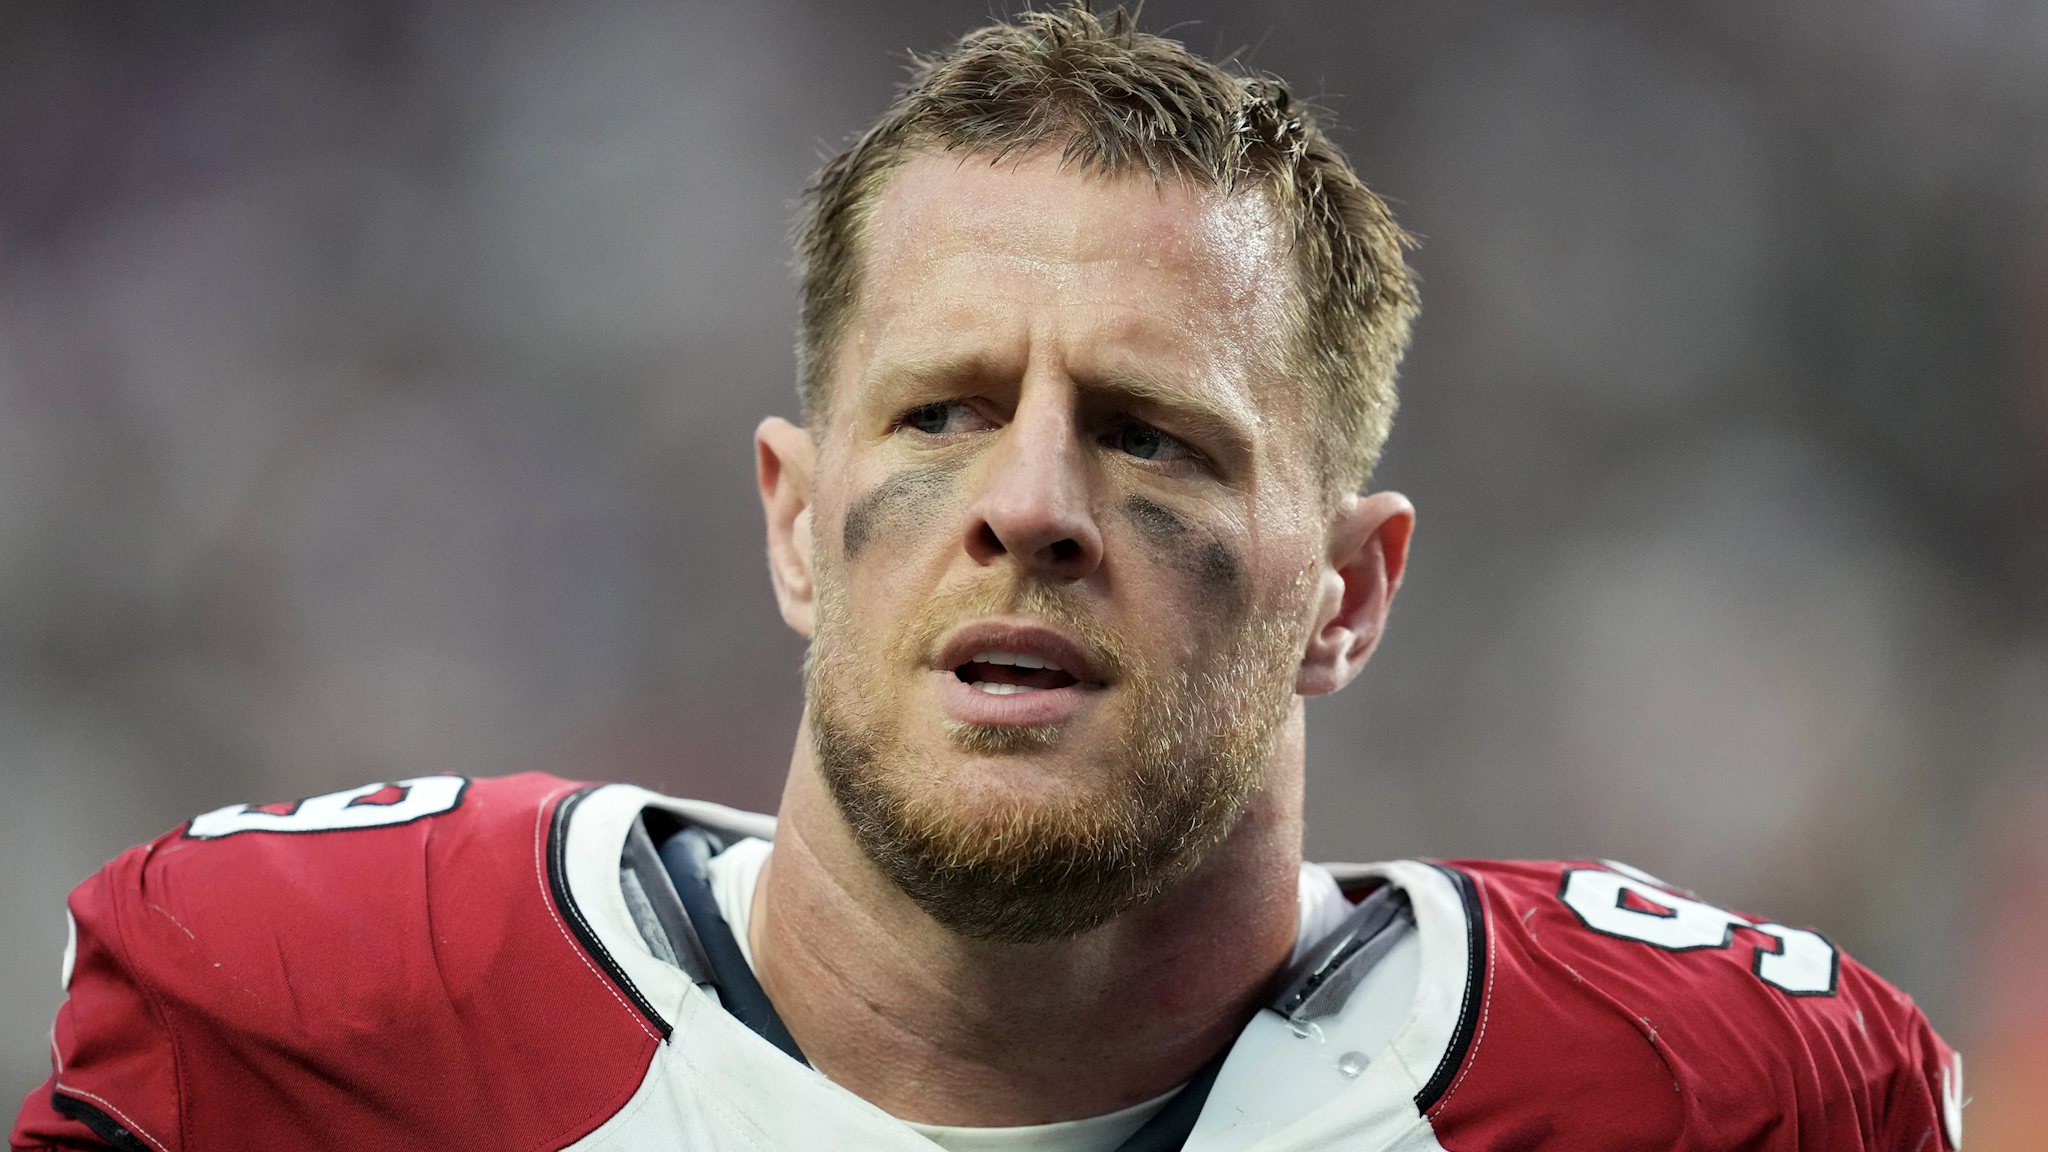 LAS VEGAS, NEVADA - SEPTEMBER 18: J.J. Watt #99 of the Arizona Cardinals walks off the field after a 29-23 win in overtime against the Las Vegas Raiders at Allegiant Stadium on September 18, 2022 in Las Vegas, Nevada.